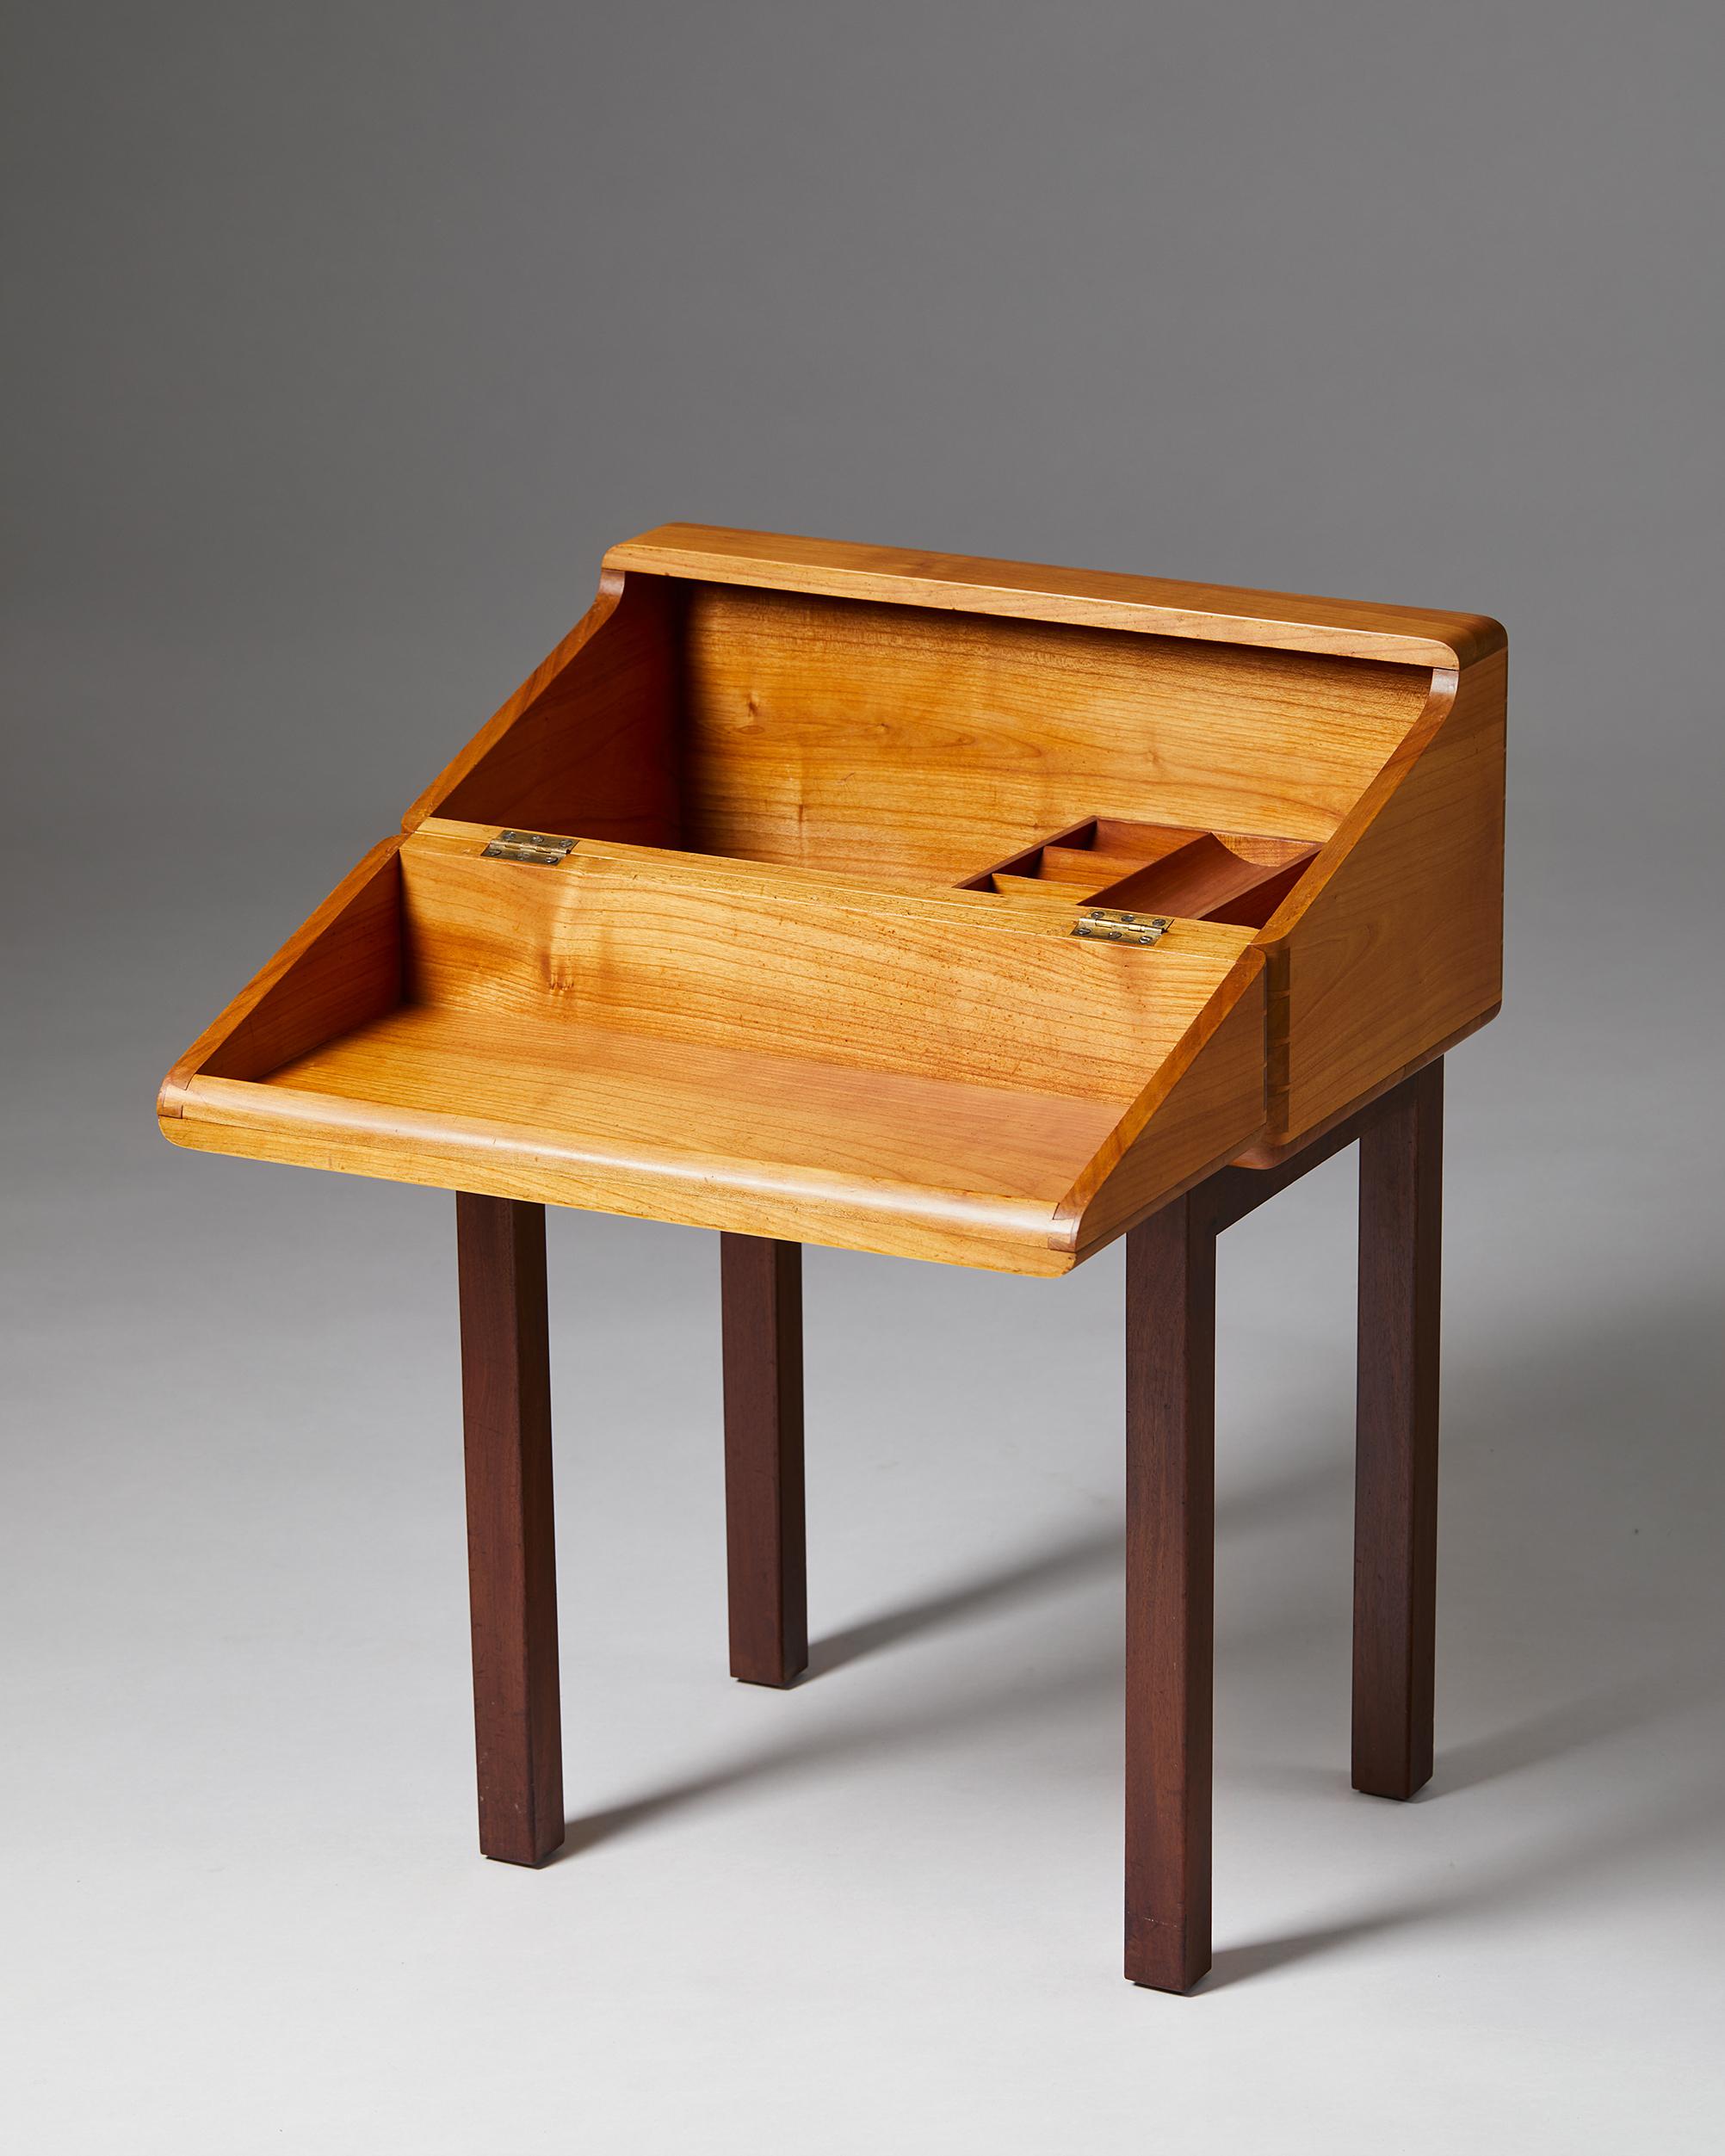 Sewing box designed by Magnus L. Stephensen for Axel Søllner,
Denmark. 1935.

Pearwood, African Mahogany and brass.

Dimensions:
H: 66 cm/ 2'2